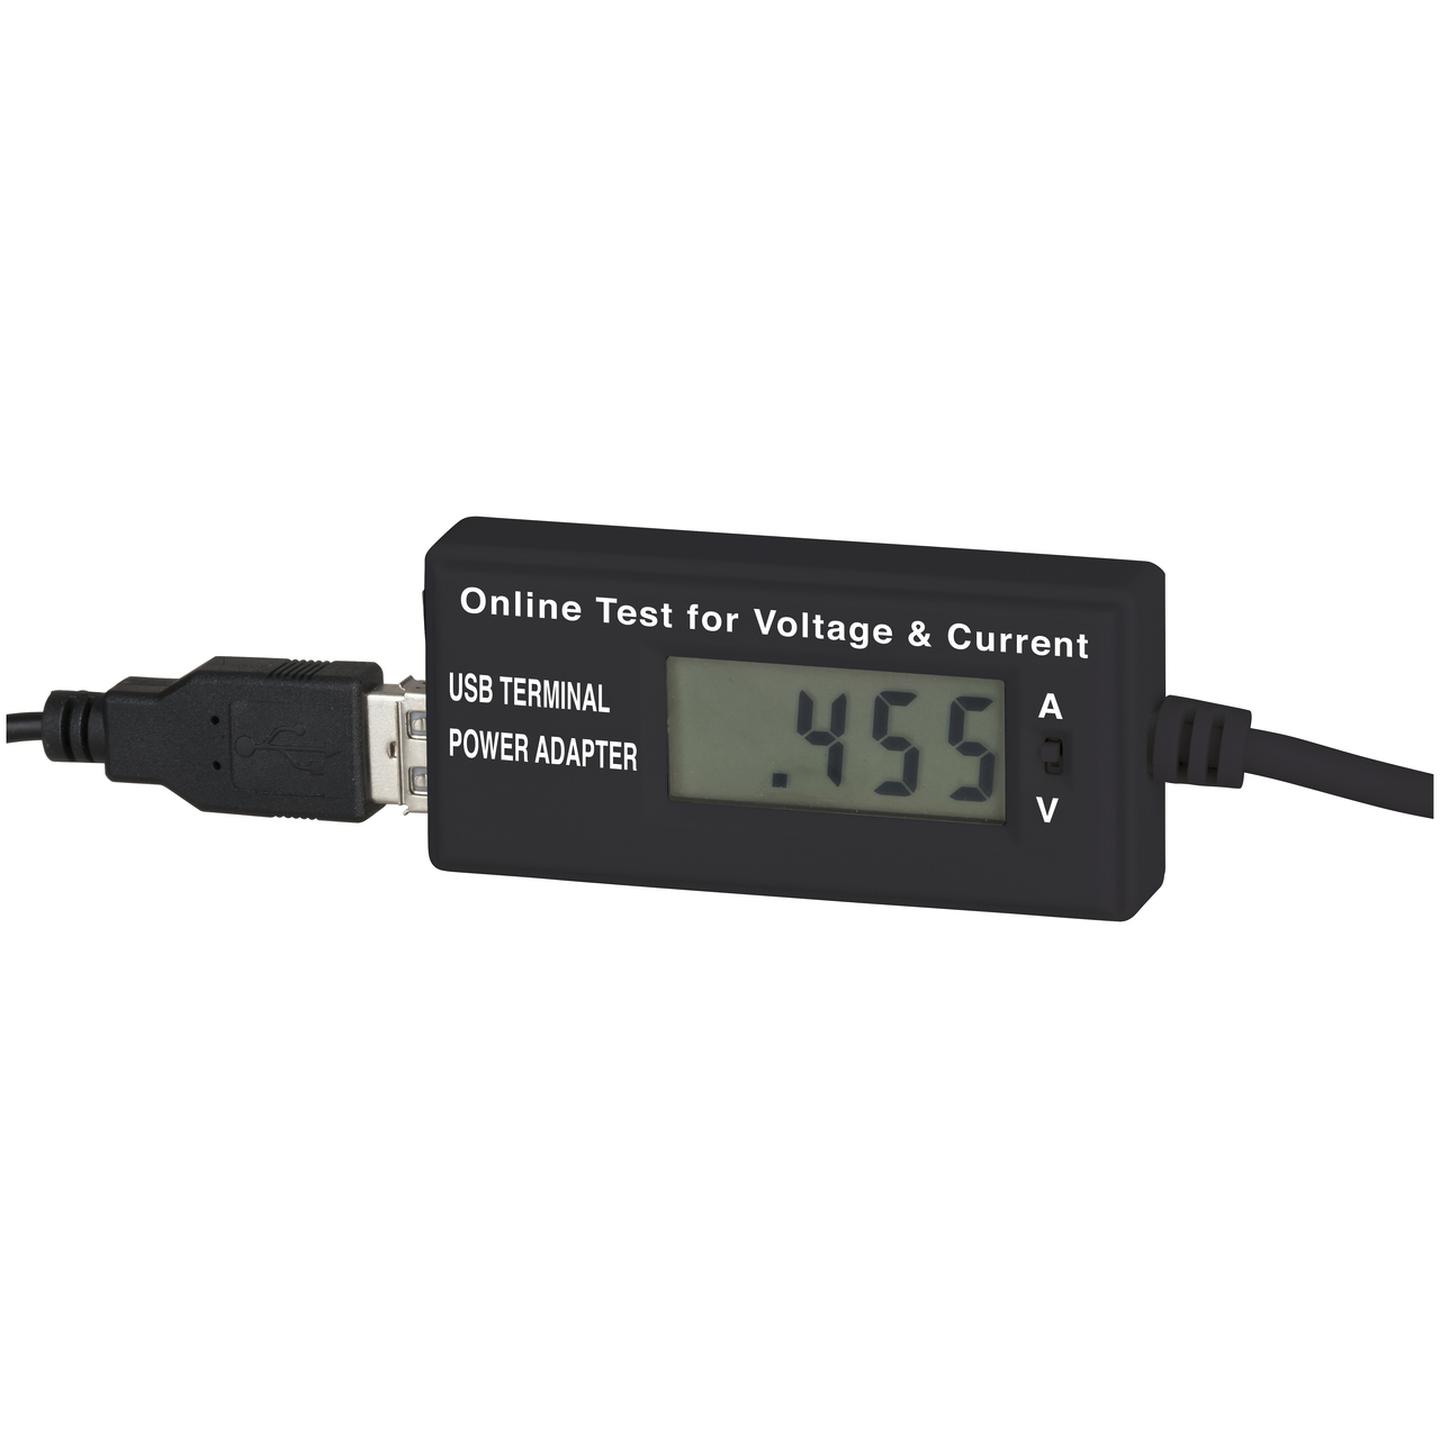 USB Voltage and Current Tester